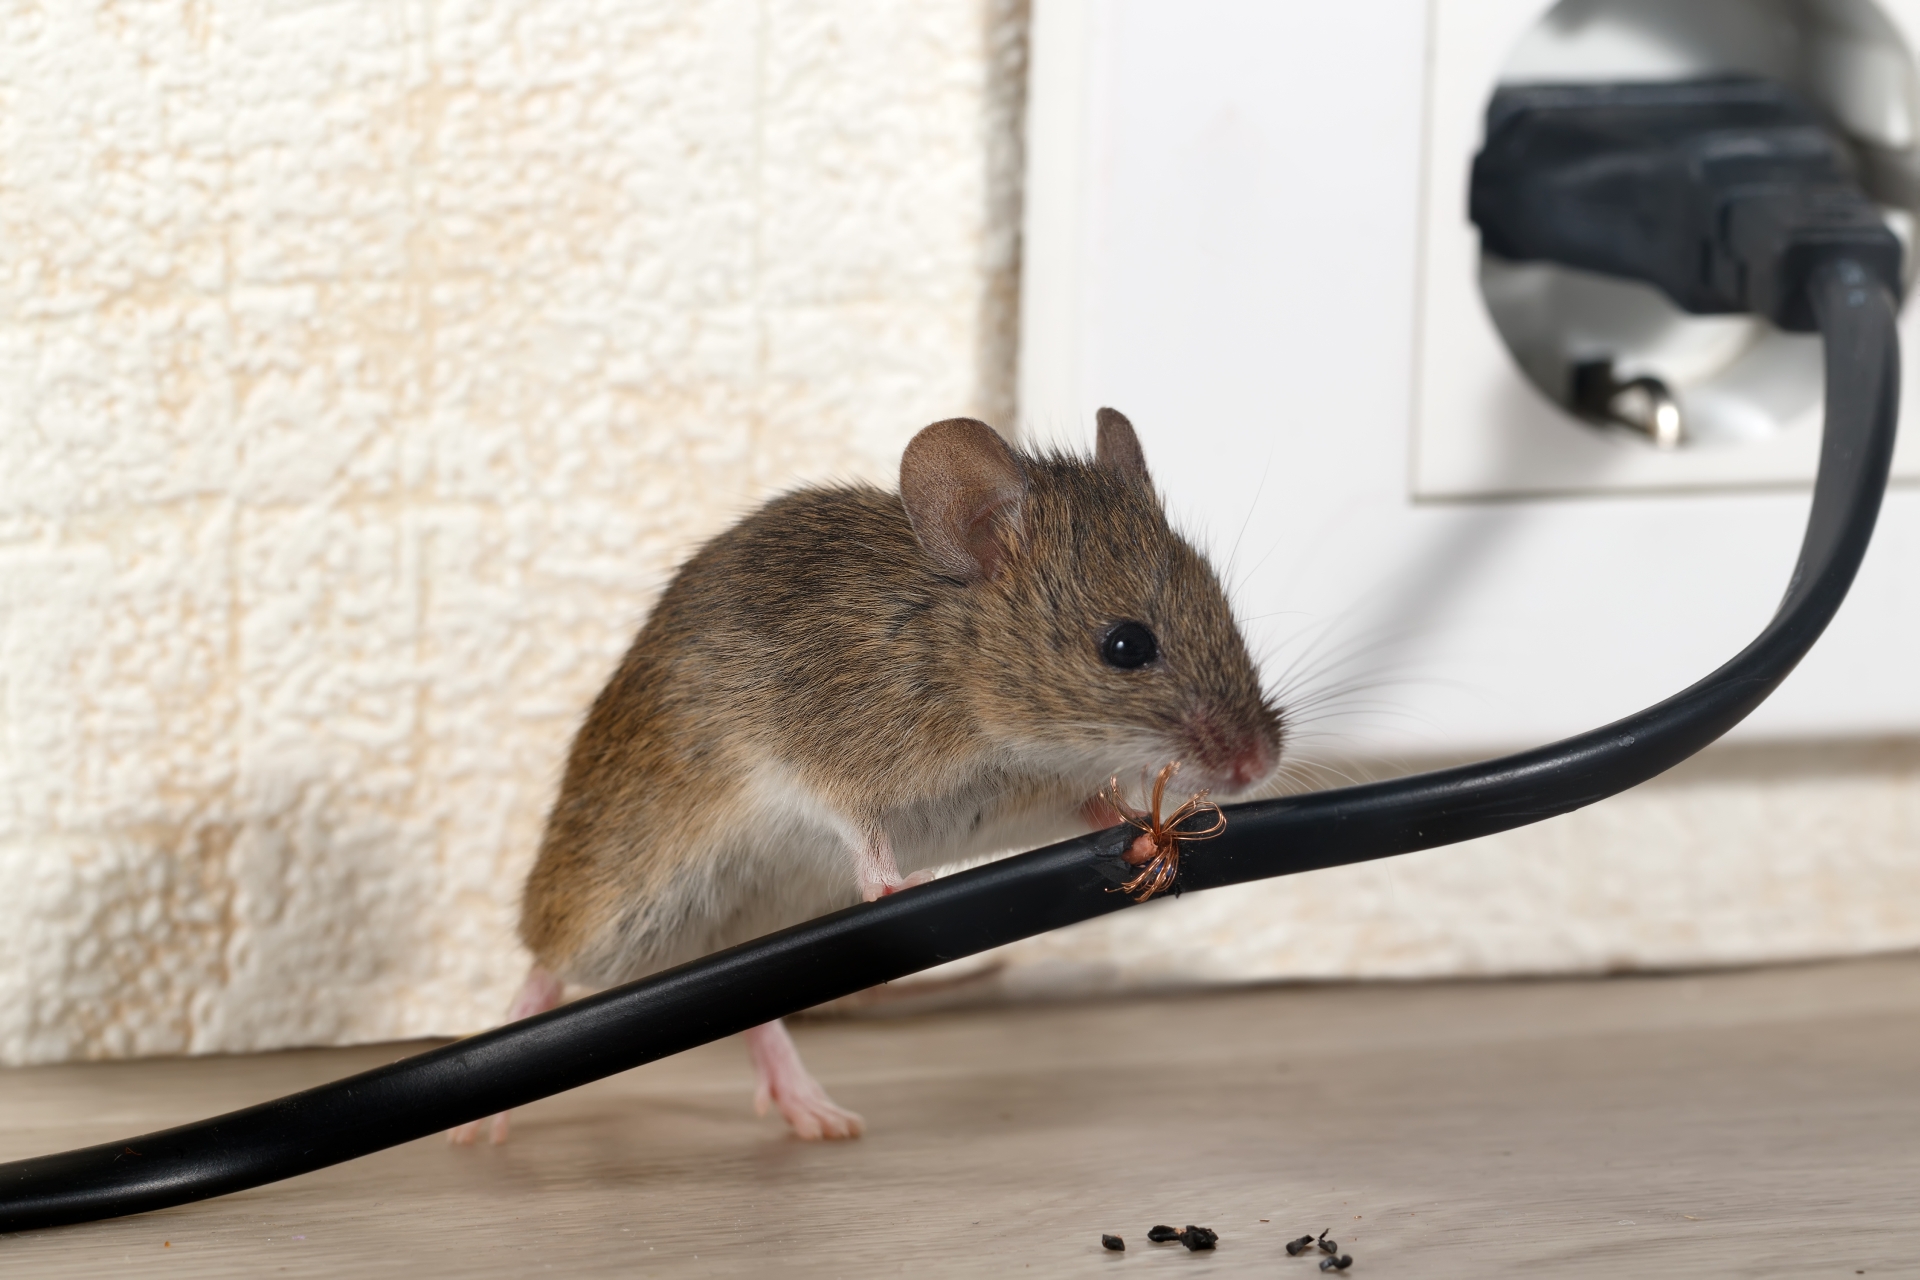 Mice Infestation, Pest Control in Caterham, Chaldon, Woldingham, CR3. Call Now 020 8166 9746